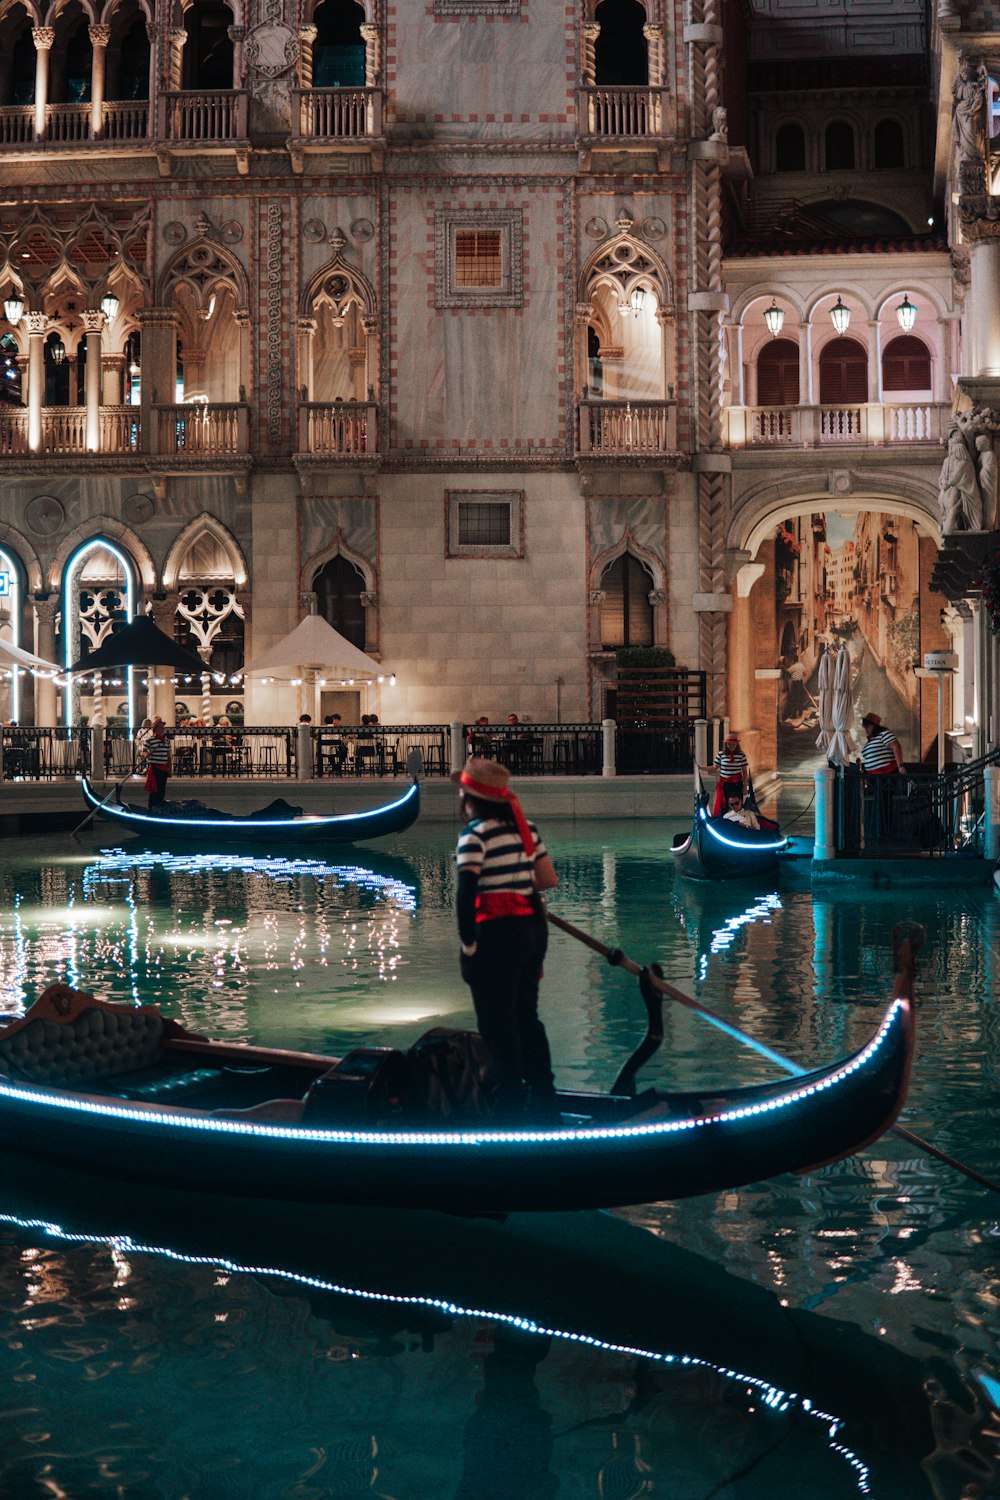 a gondola in the middle of a large building